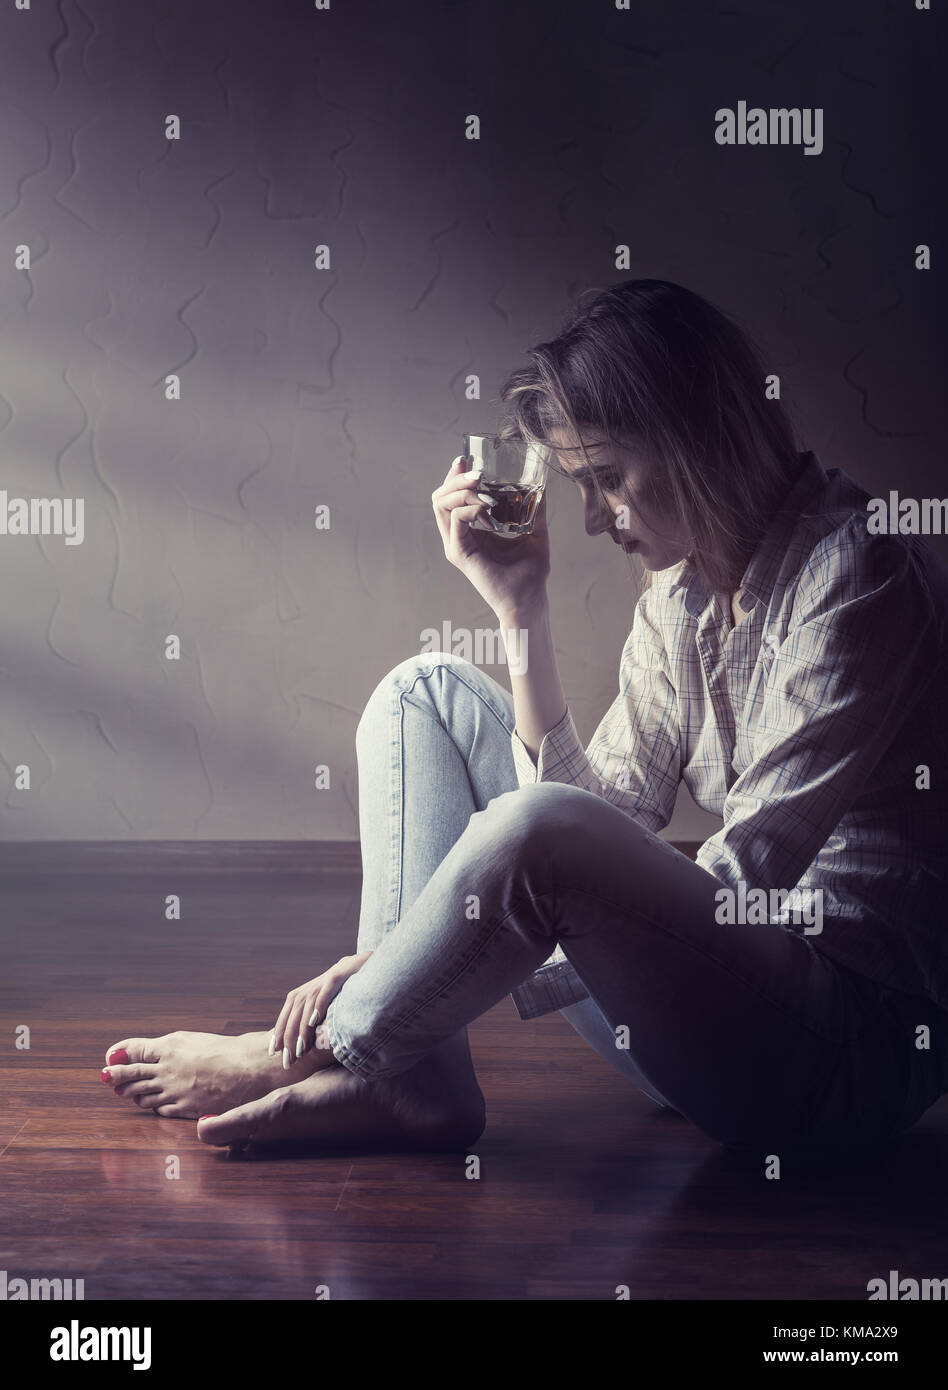 Young woman in depression drinks alcohol while sitting on the floor Stock Photo